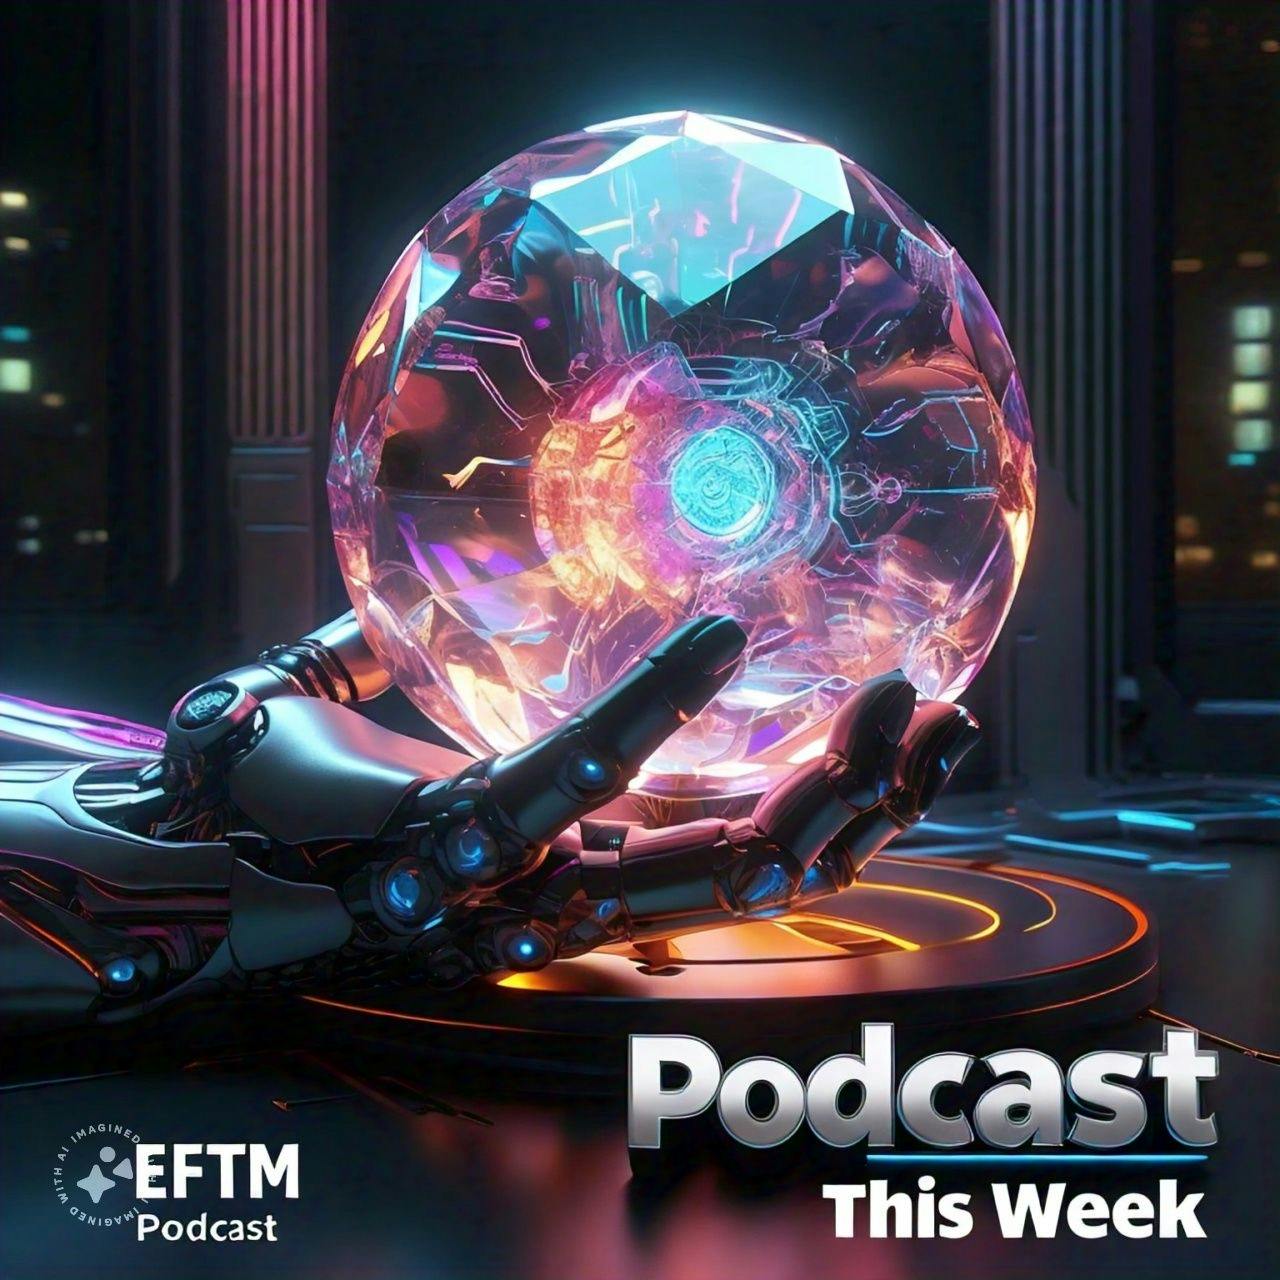 EFTM: More AI Music and all your talkback calls